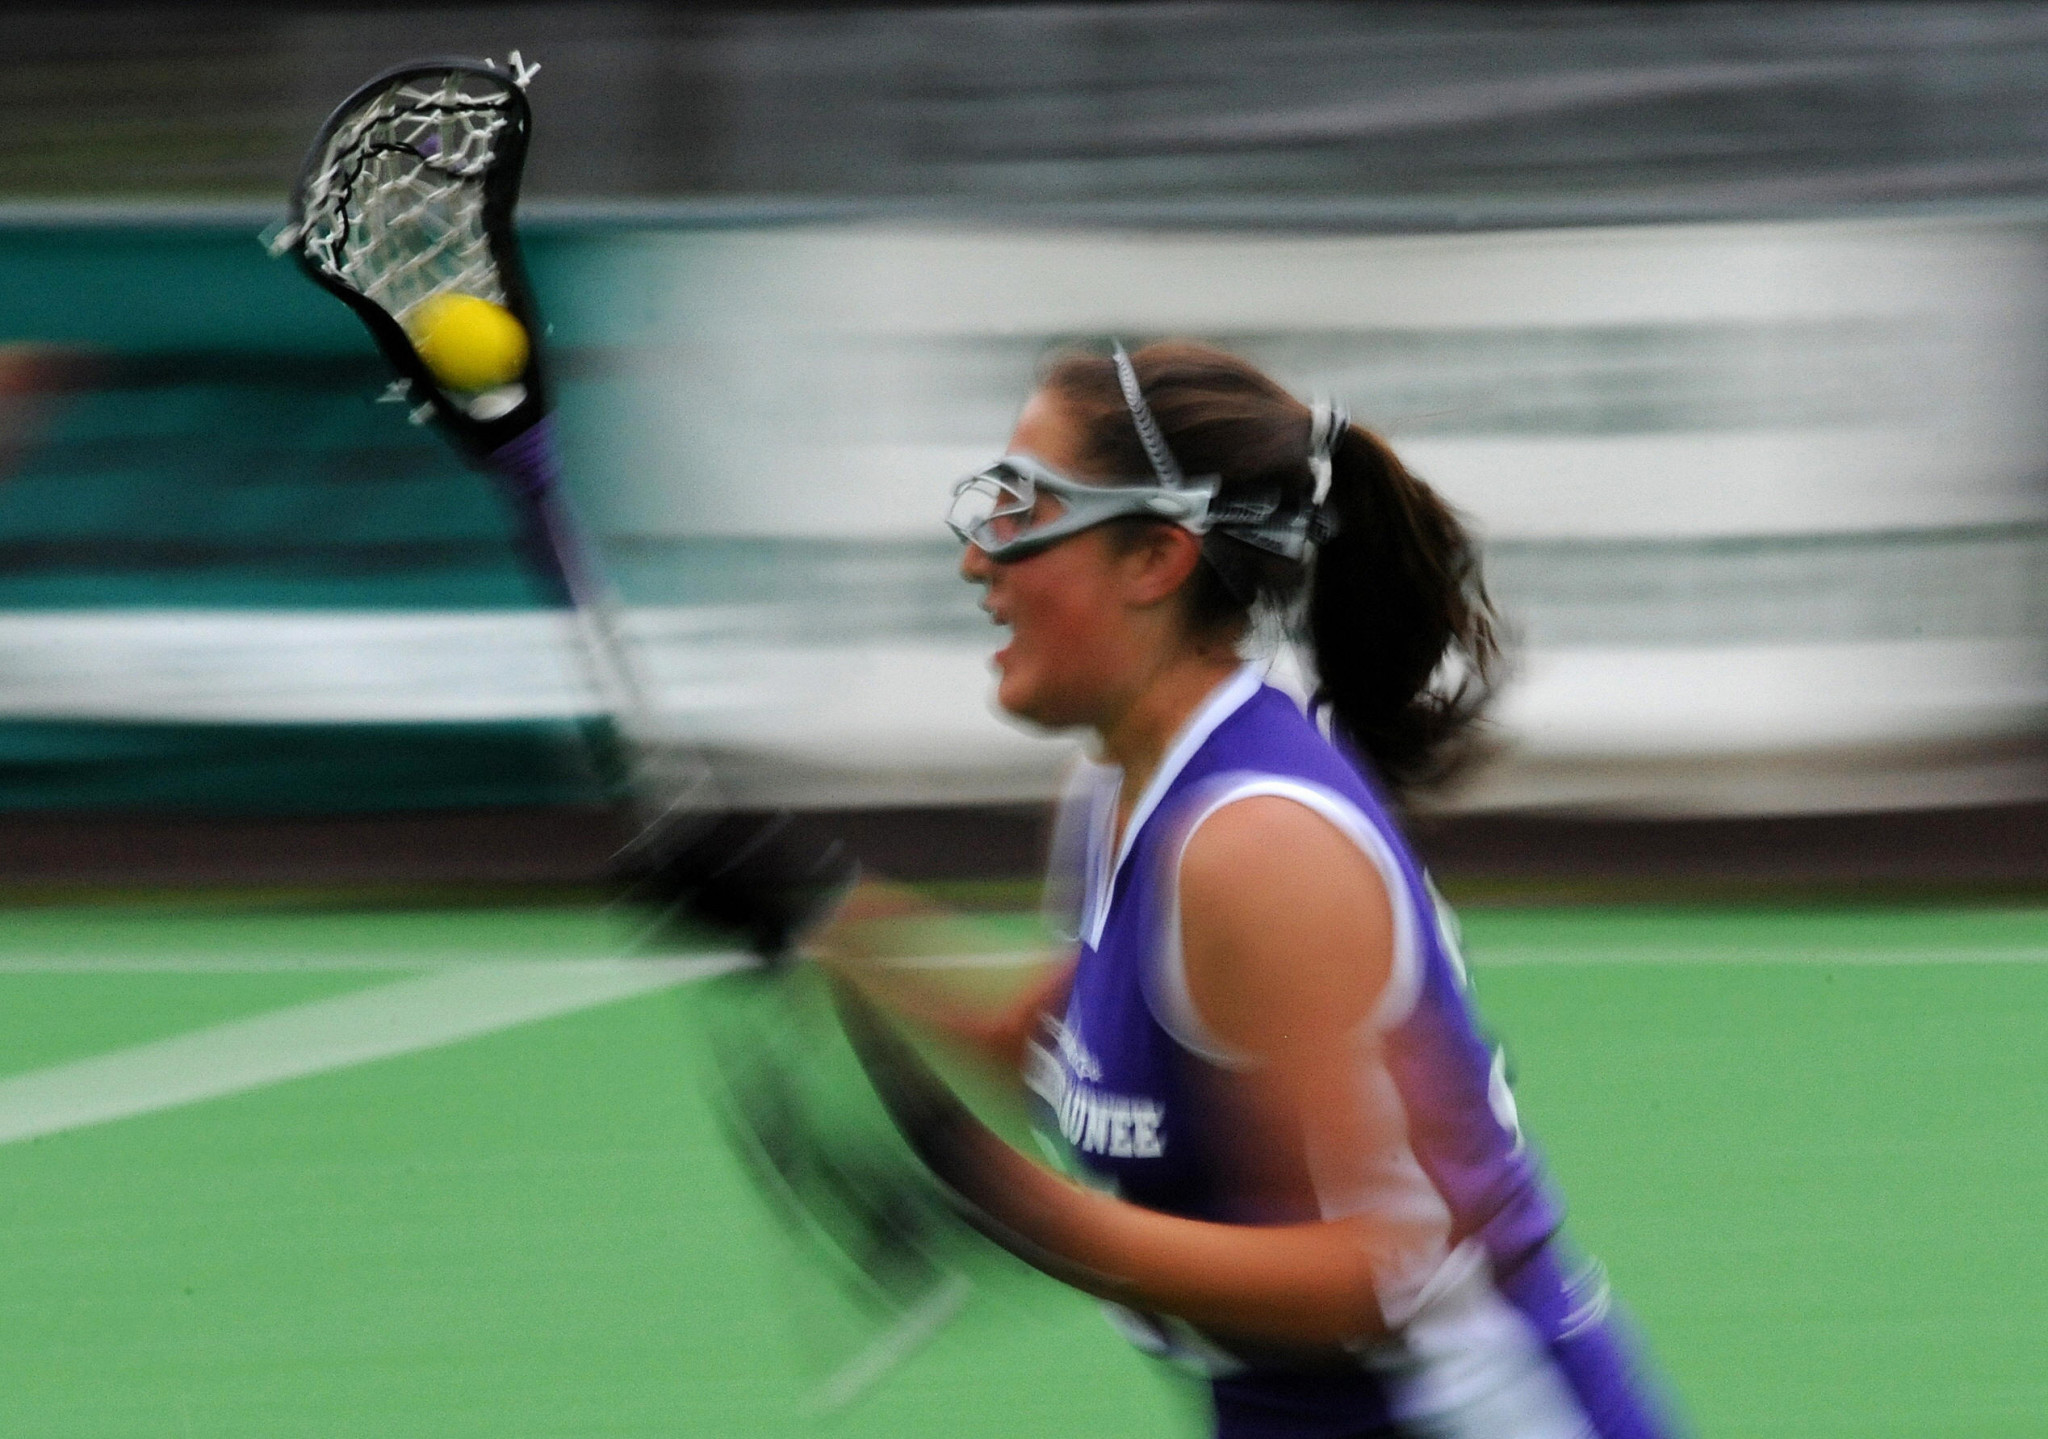 Exclusive: World Lacrosse hopes for "creative solutions" to allow Haudenosaunee to play at LA 2028